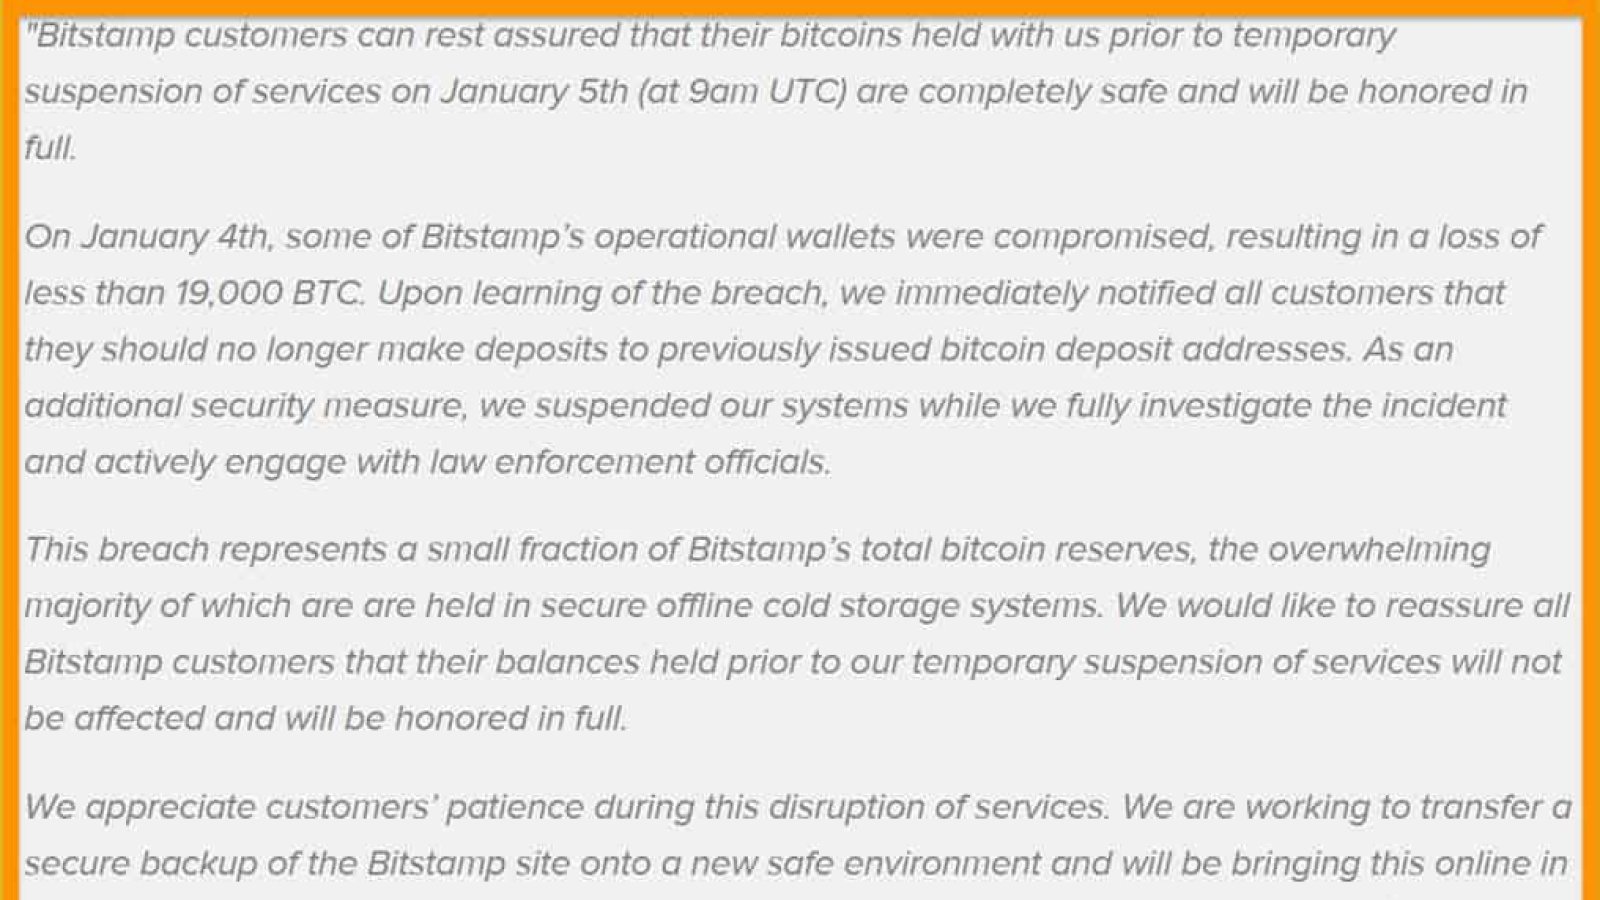 The statement of Bitstamp’s representative after hacking